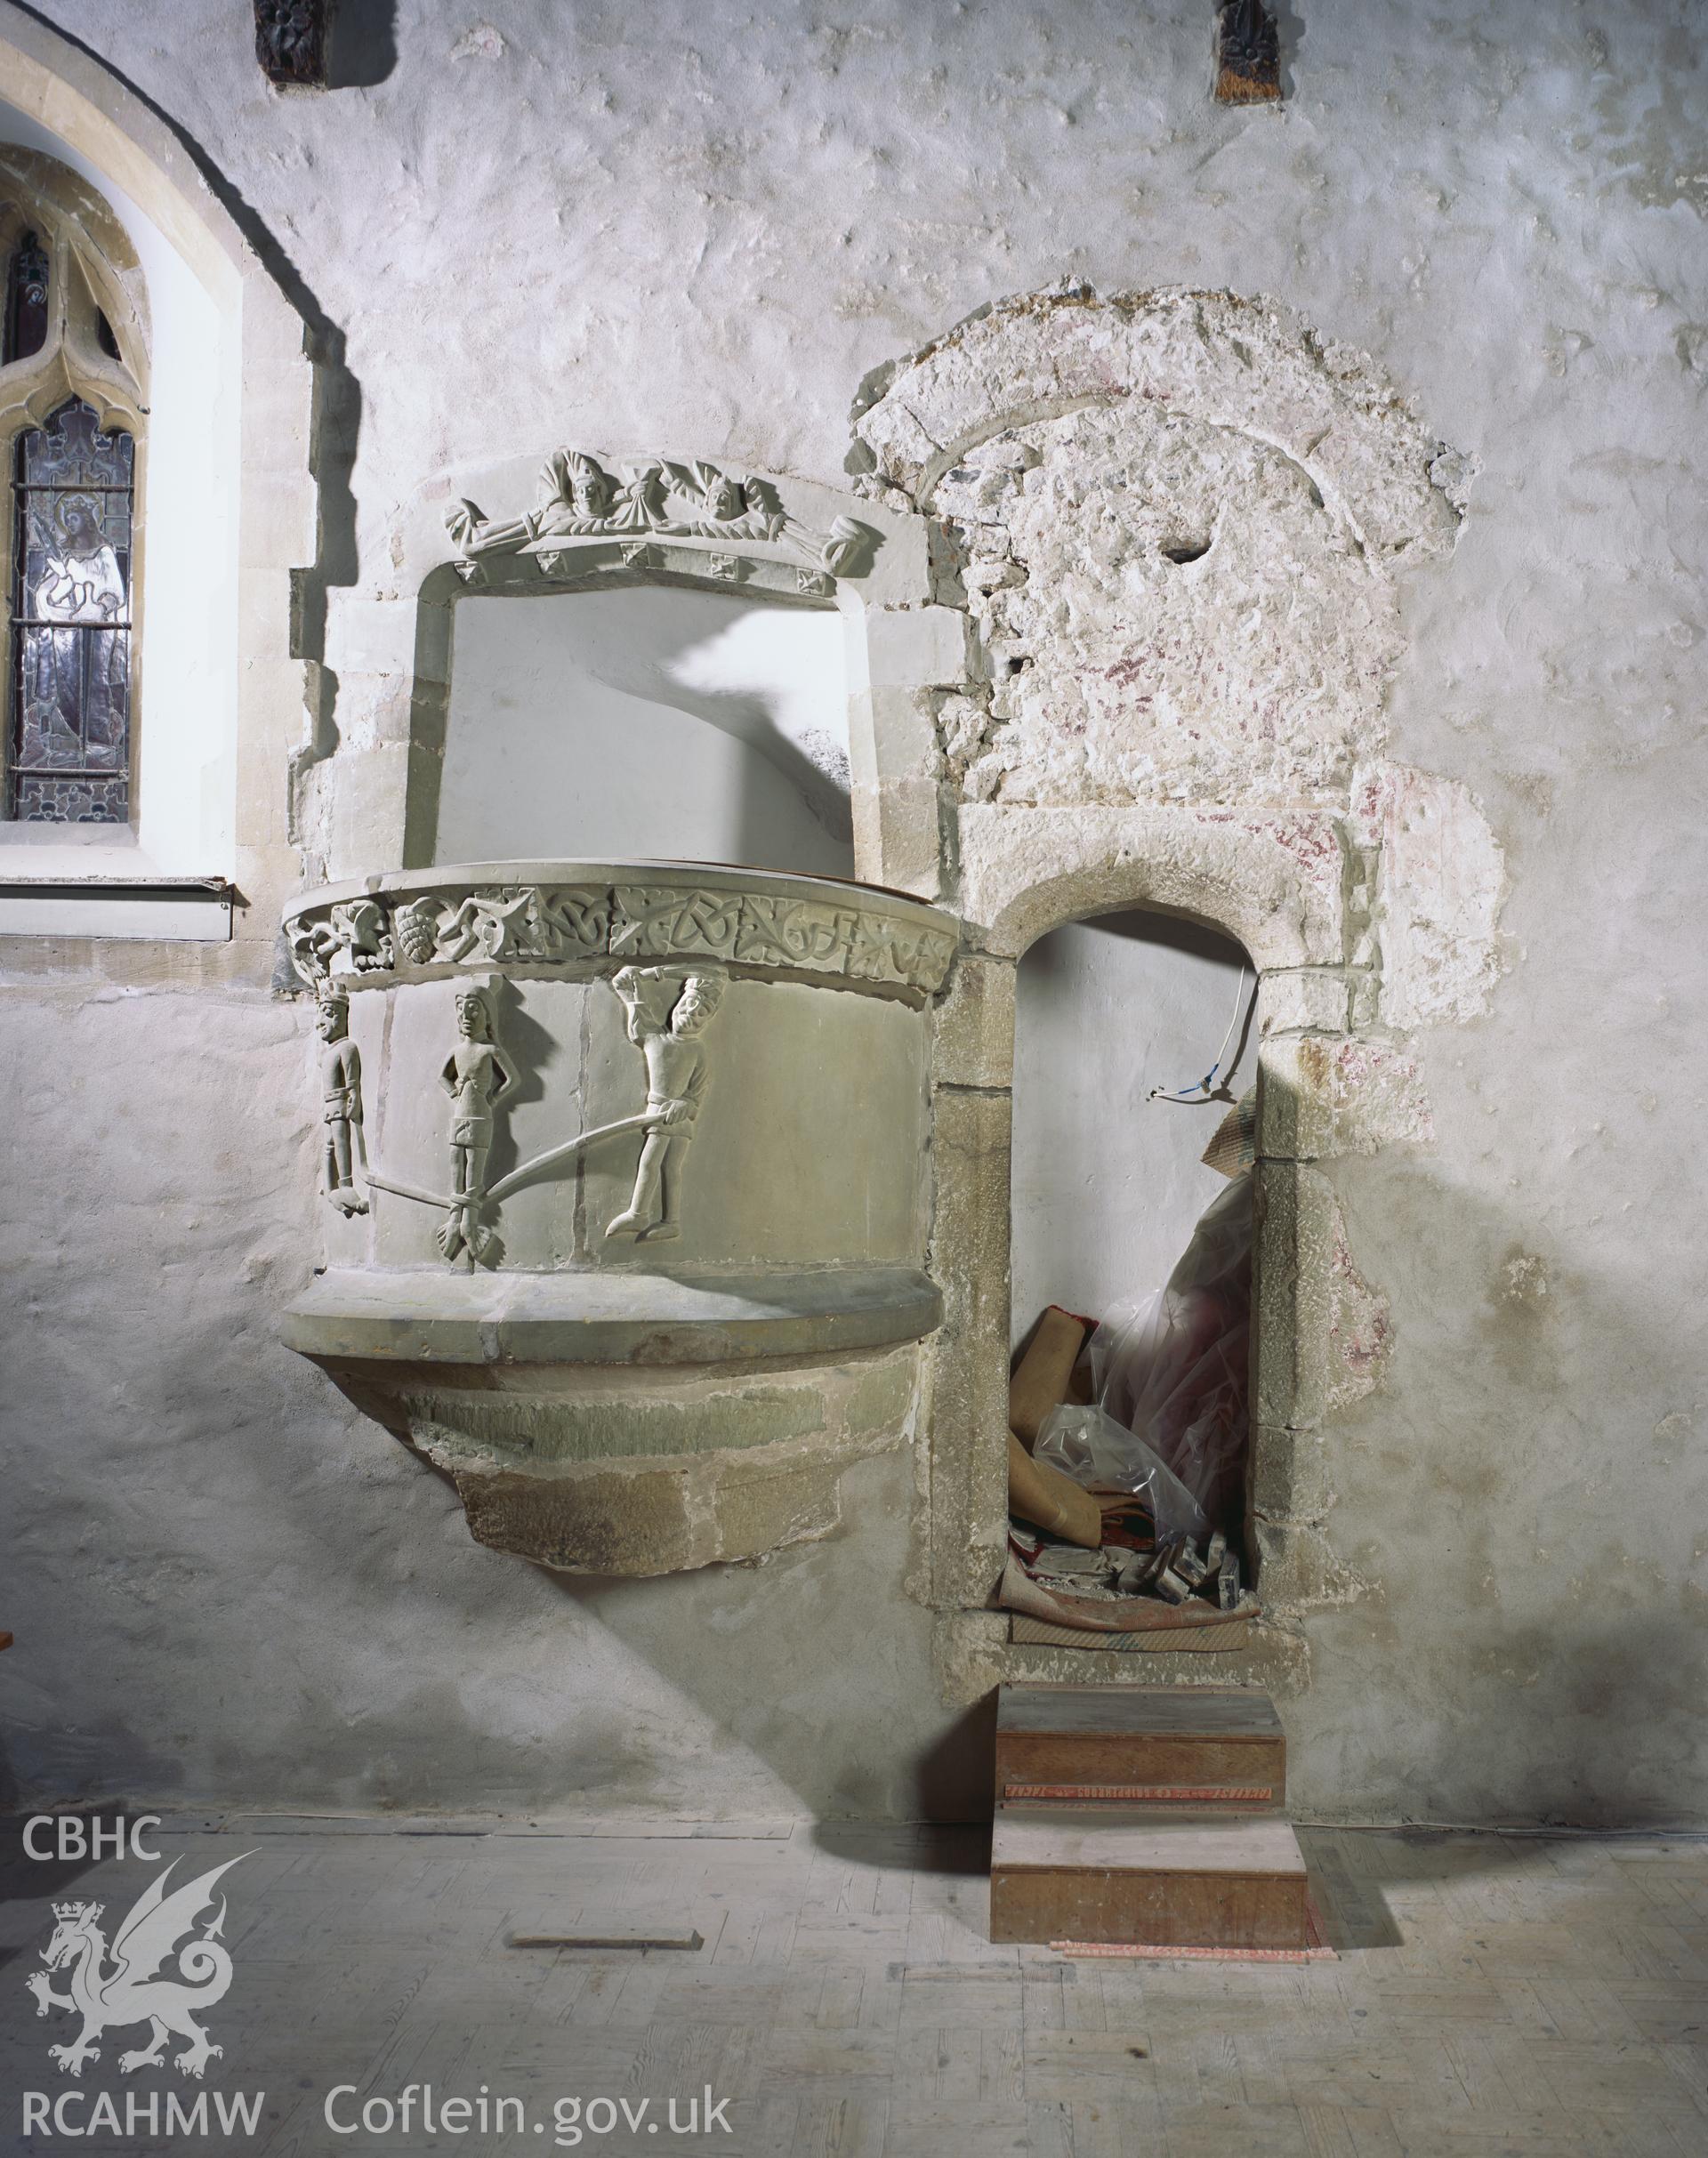 Colour transparency showing a view of the pulpit at St John the Baptist Church, Newton Nottage, produced by Iain Wright 2004